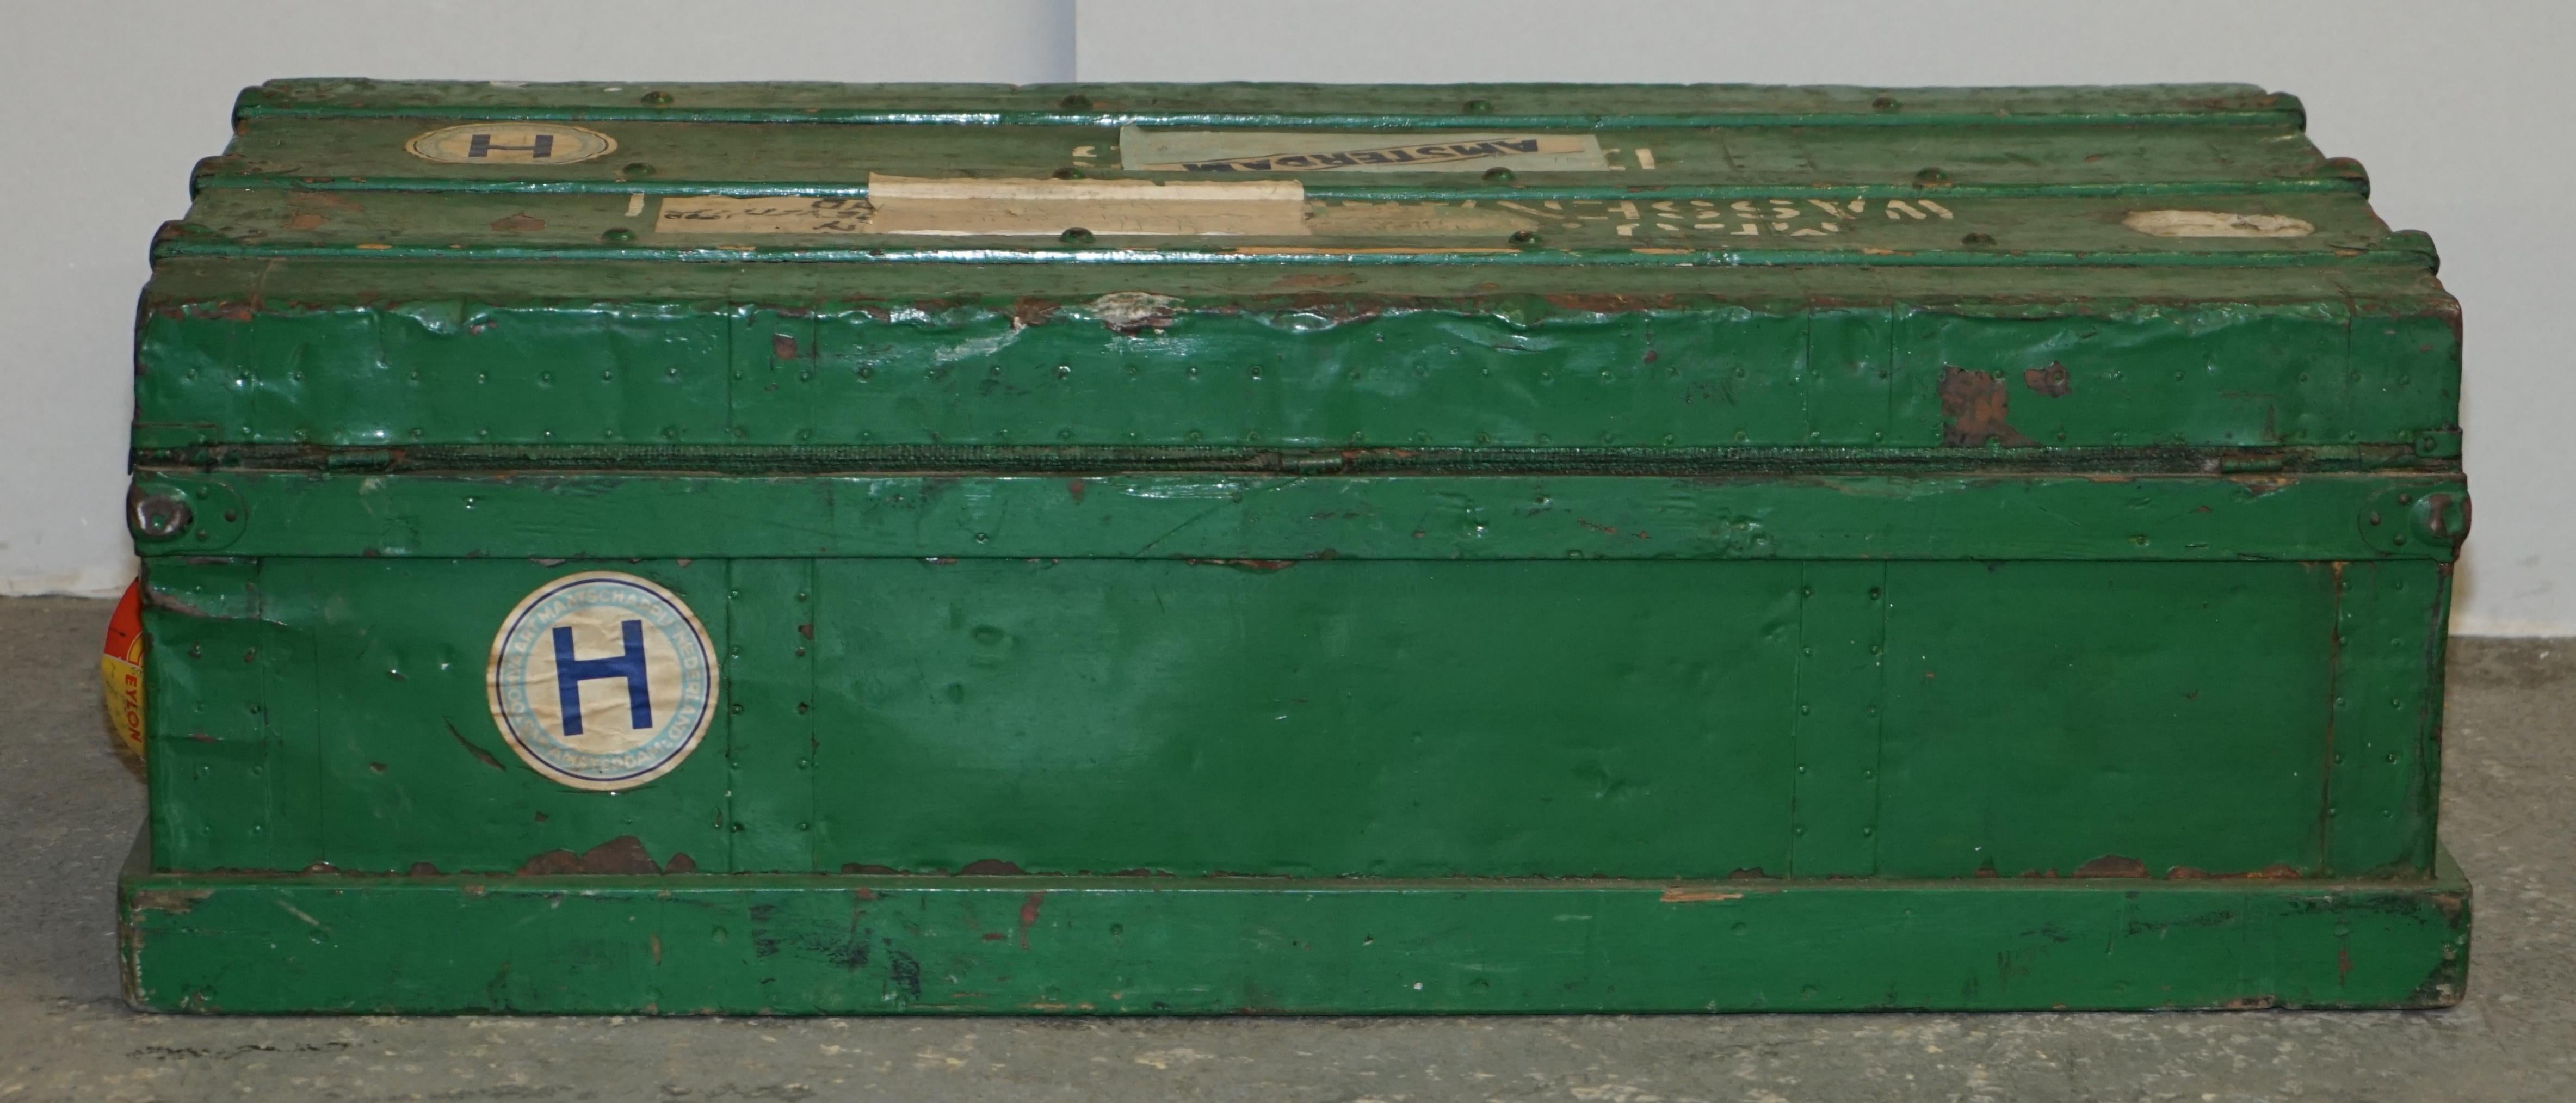 Original European Green Painted Metal Zinc Military Army Campaign Chest Trunk 5